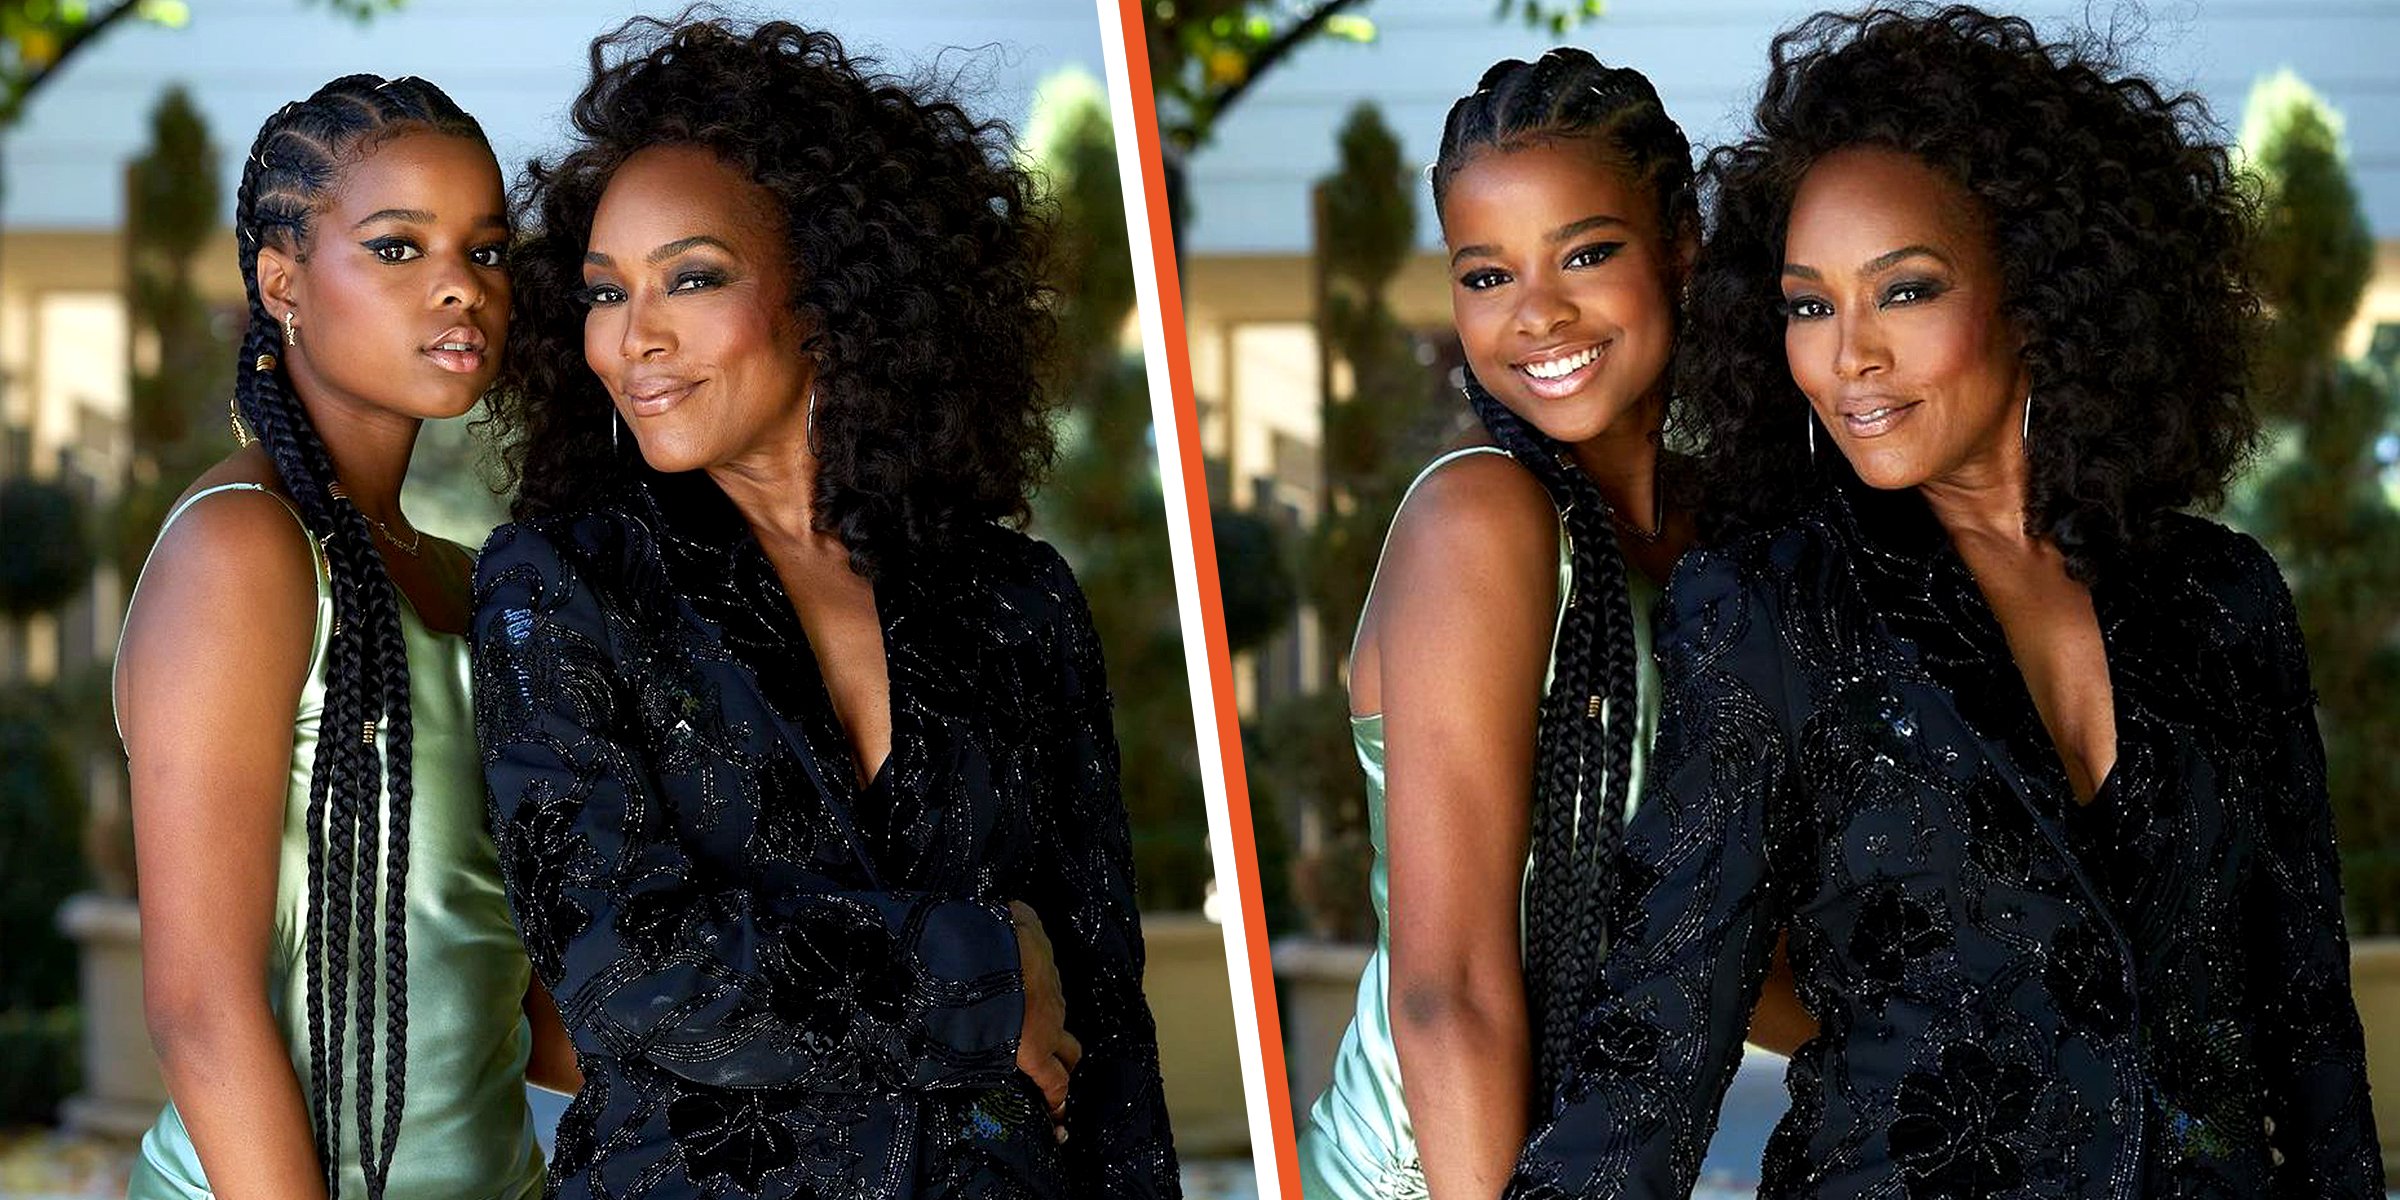 Bronwyn Vance and and Her Mother Angela Bassett Posing Together | Source: Getty Images